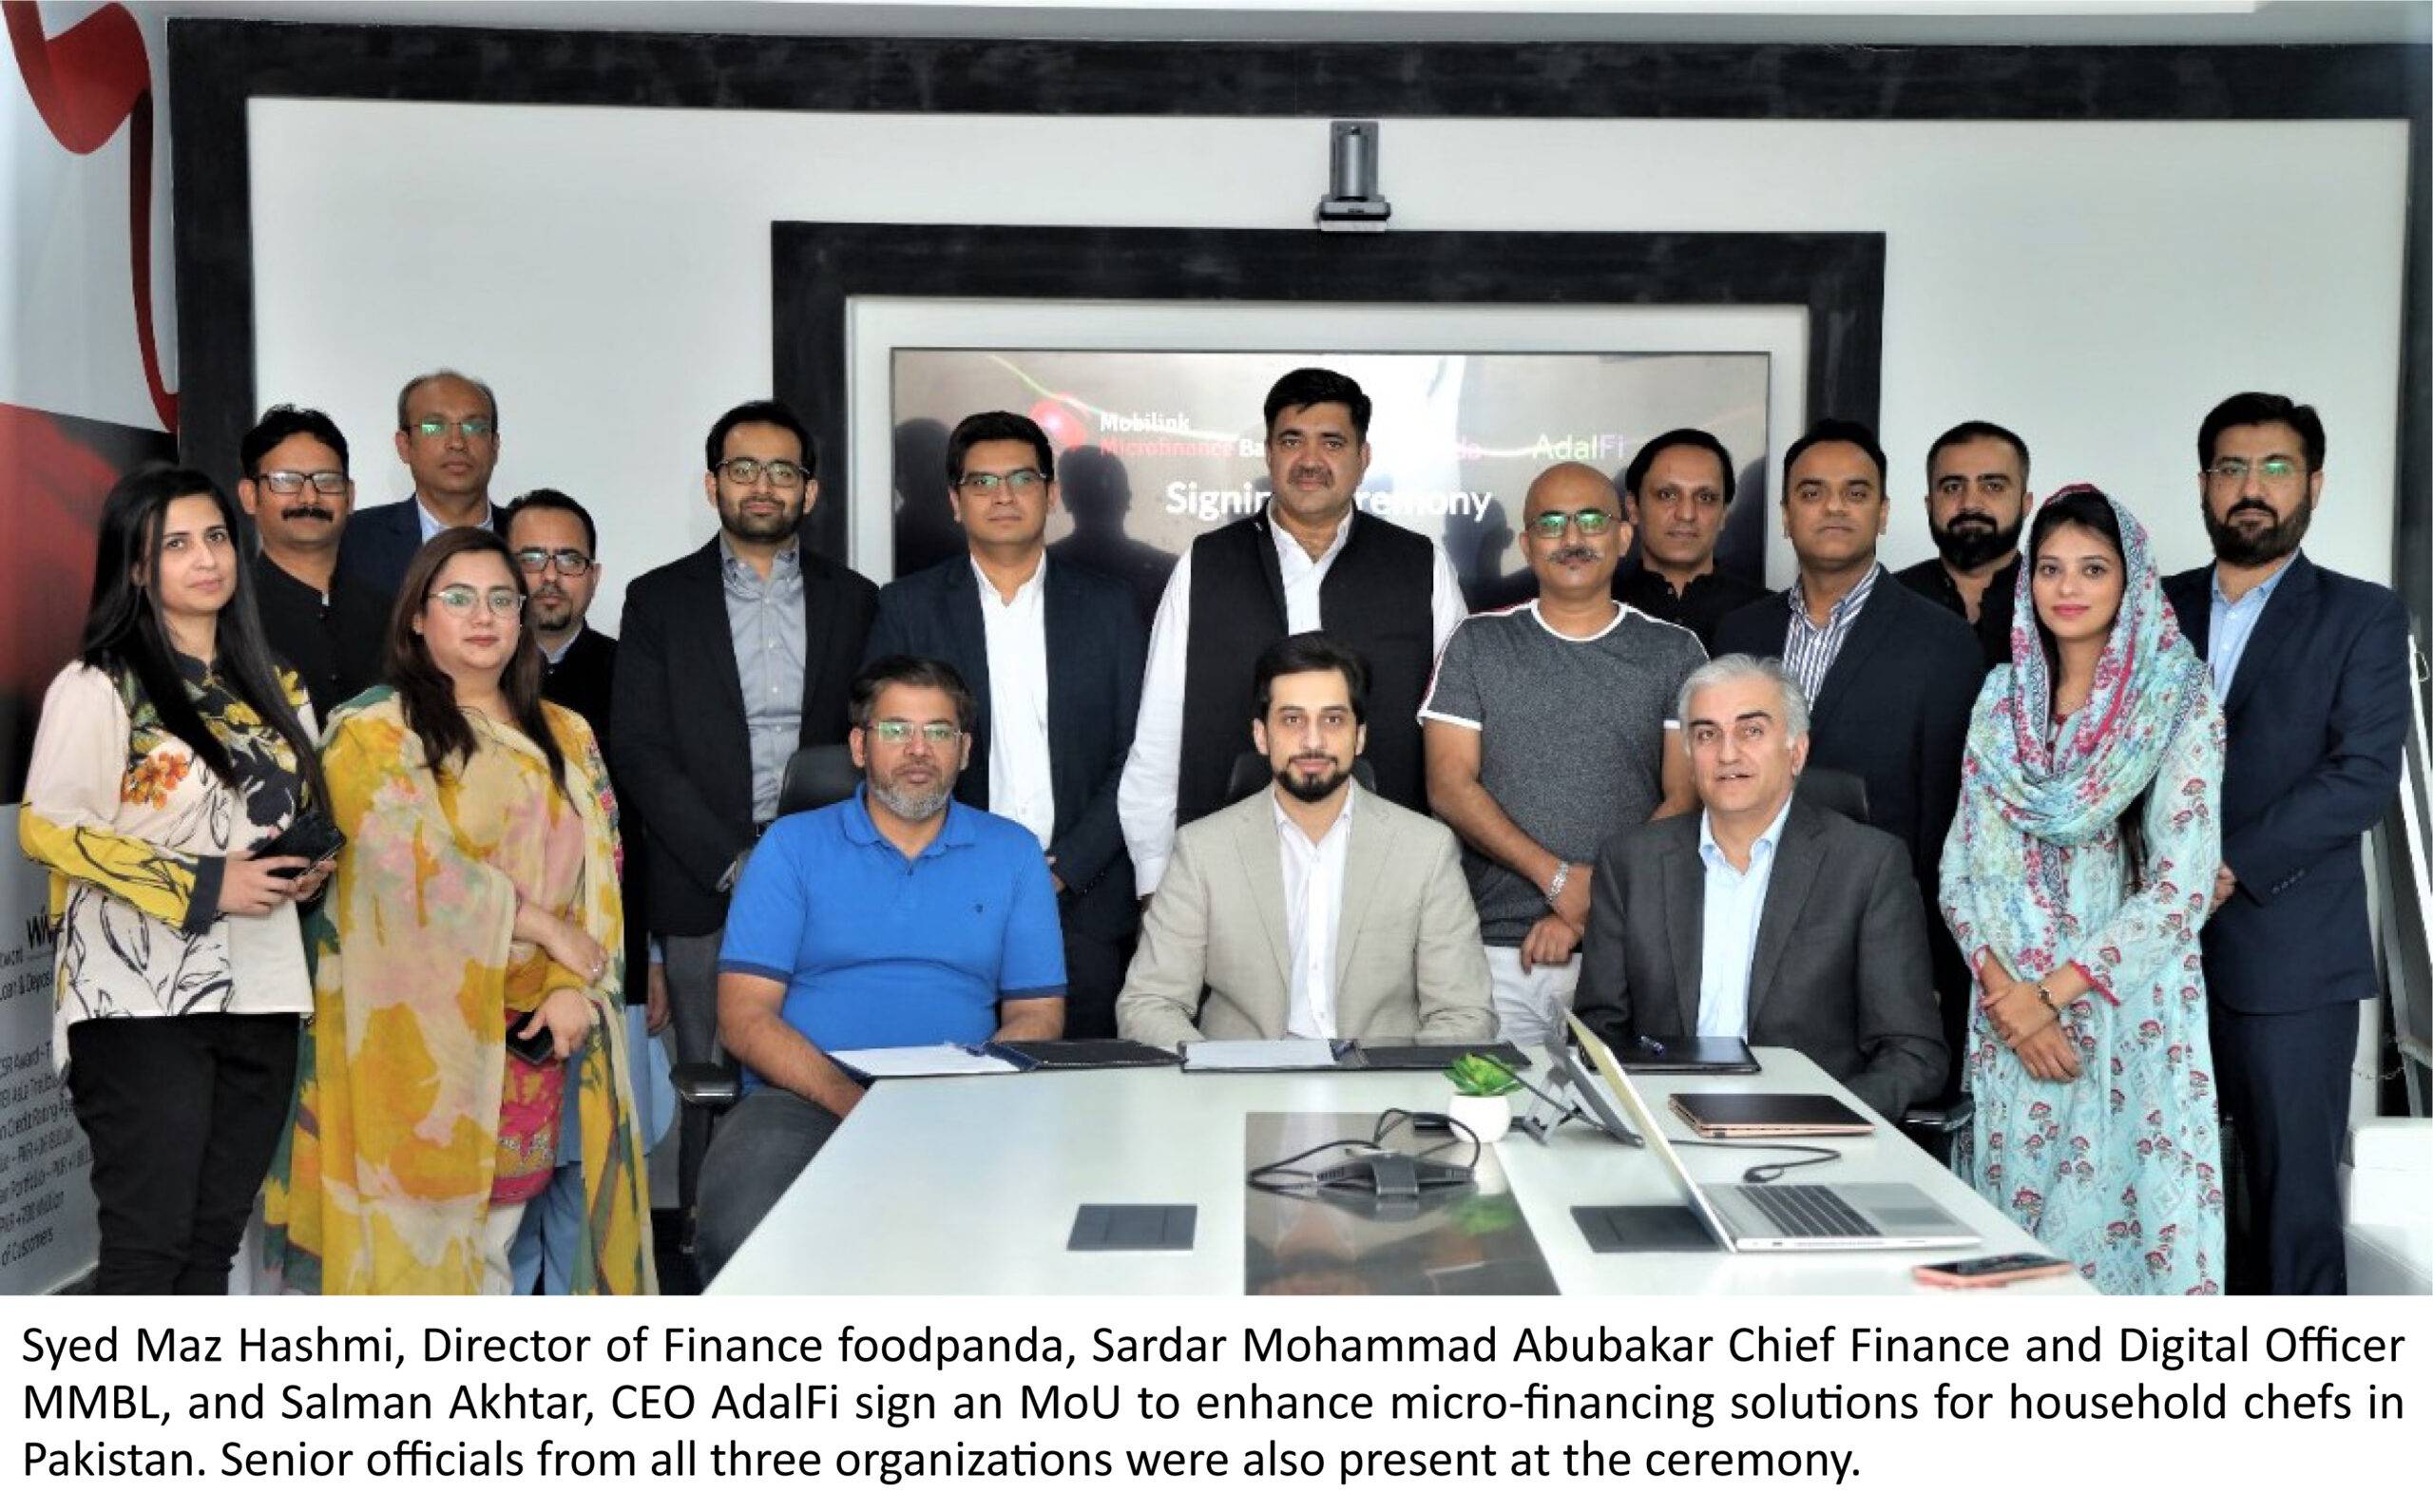 MMBL partners with foodpanda and AdalFi to offer inclusive financial services to HomeChefs